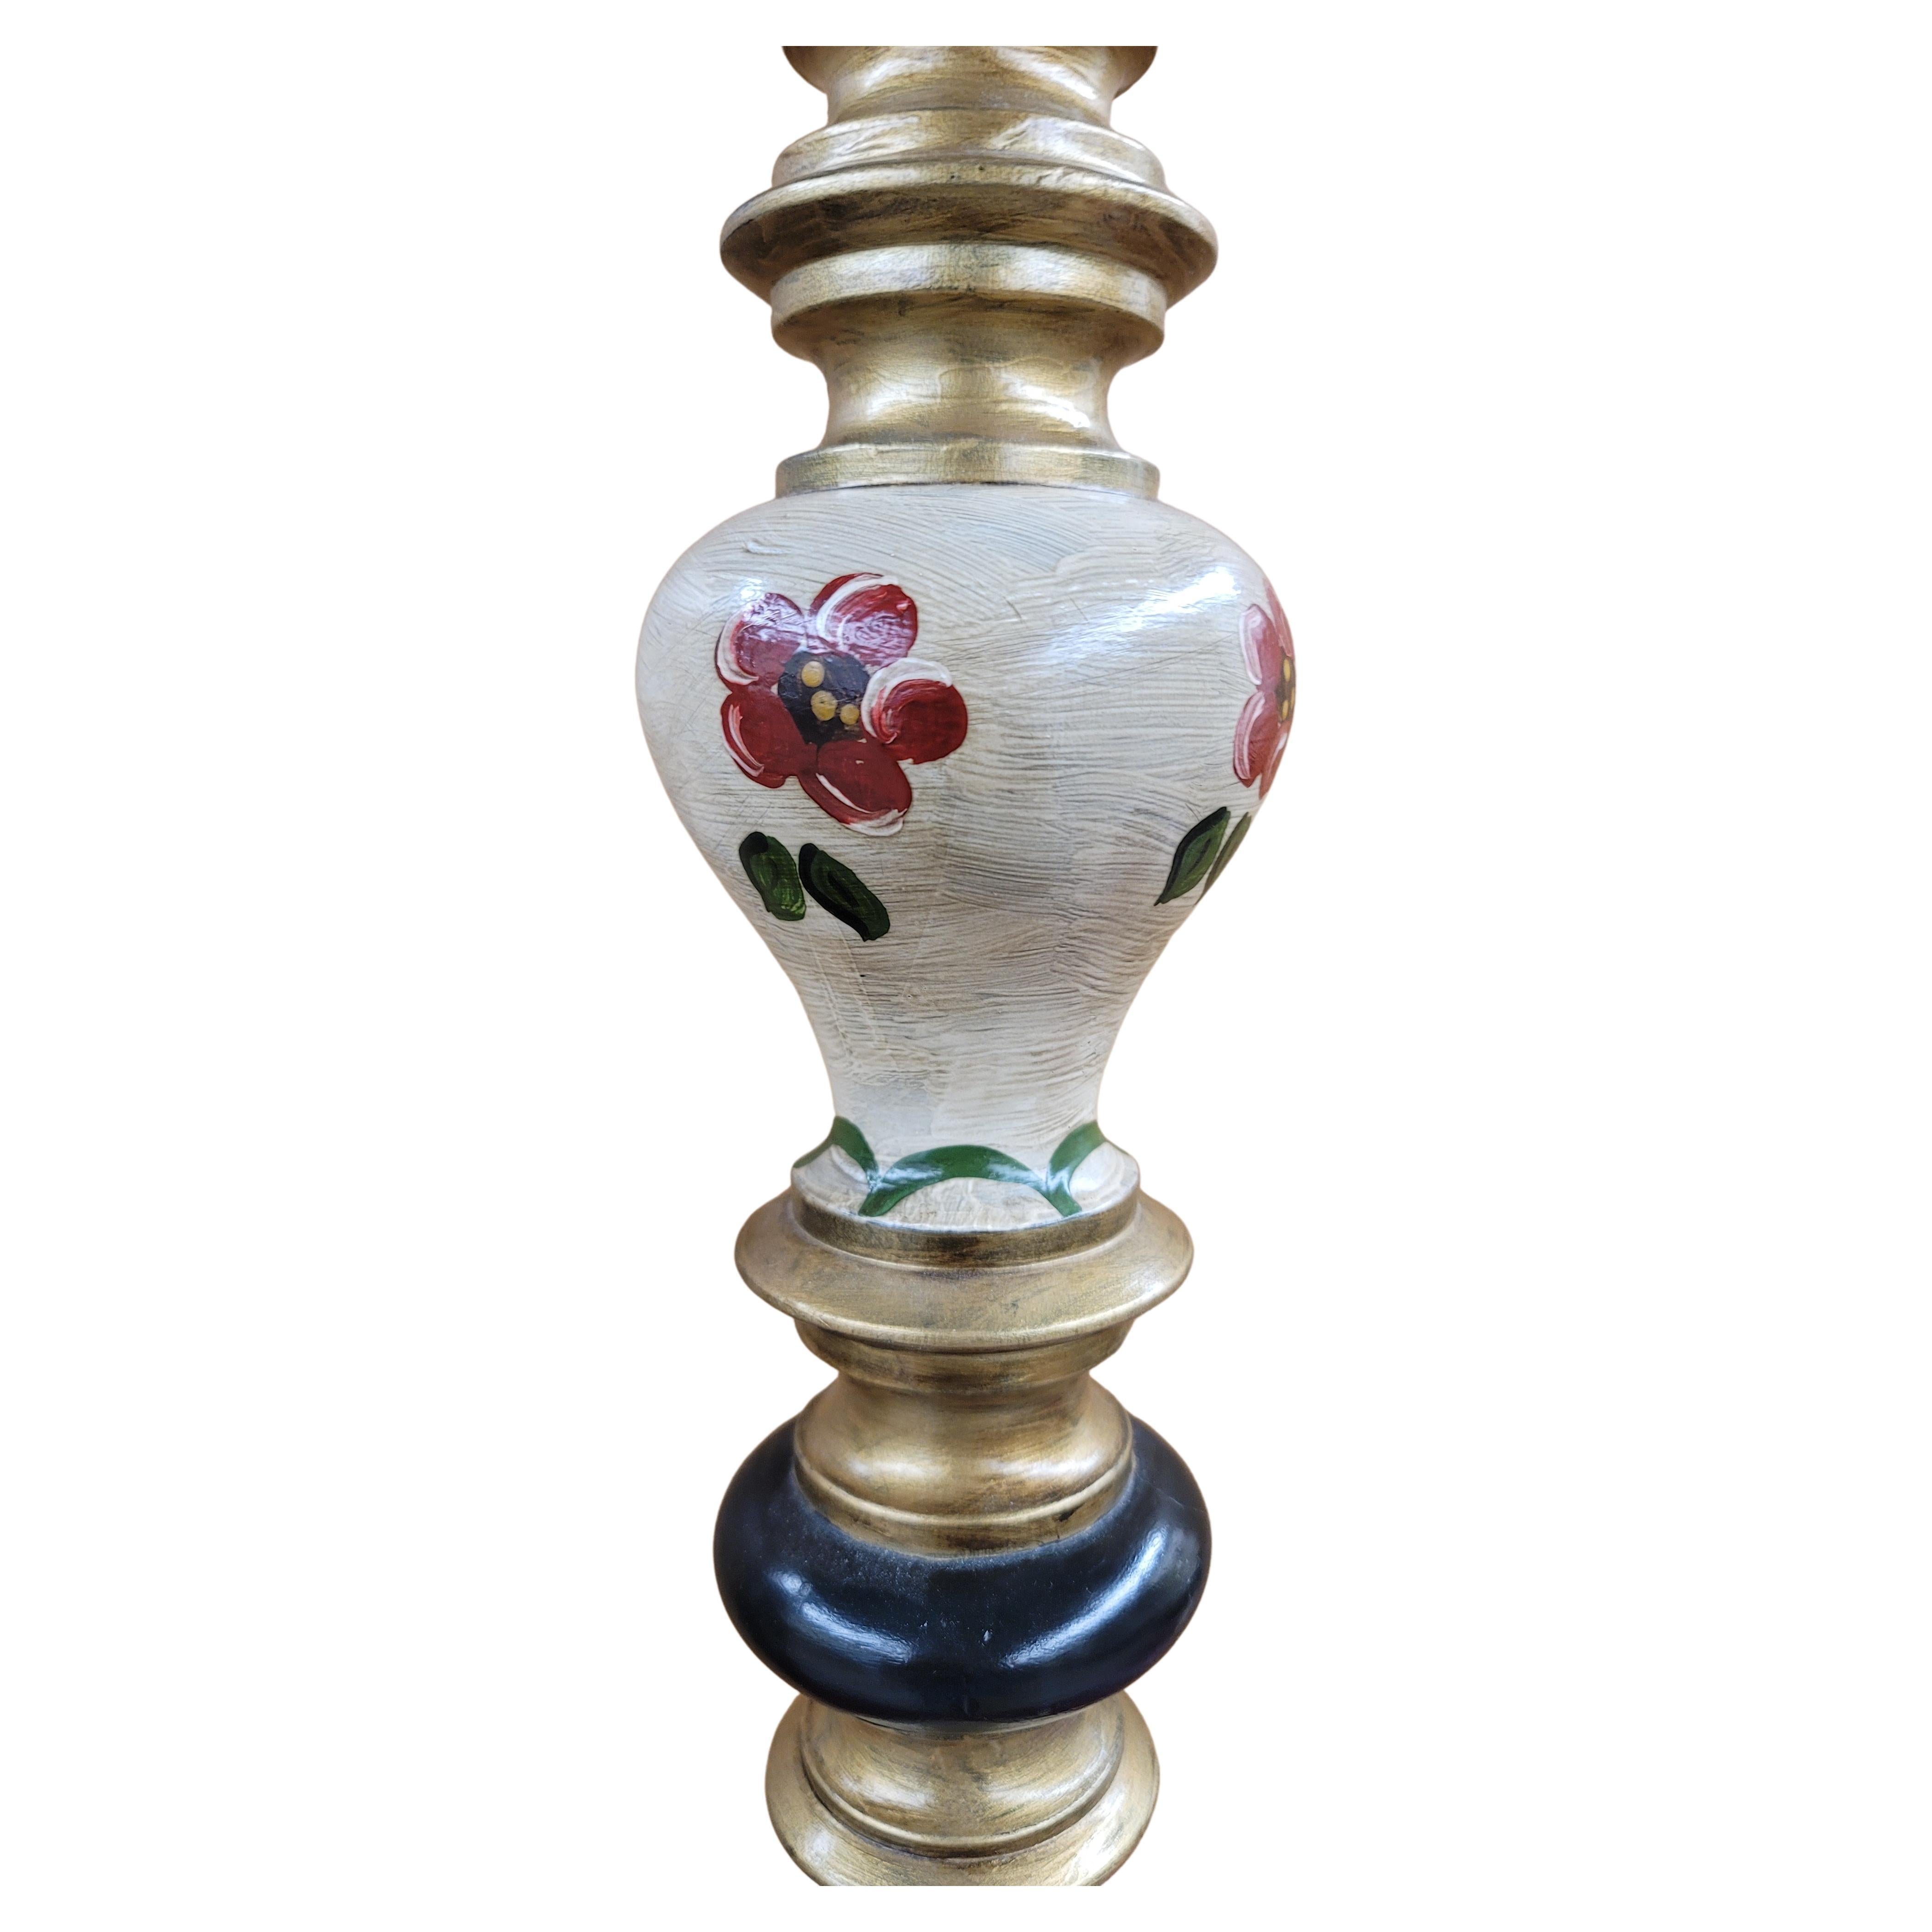 German Hand-Painted and Decorated Wood Tall Pillar Candlestick In Good Condition For Sale In Germantown, MD